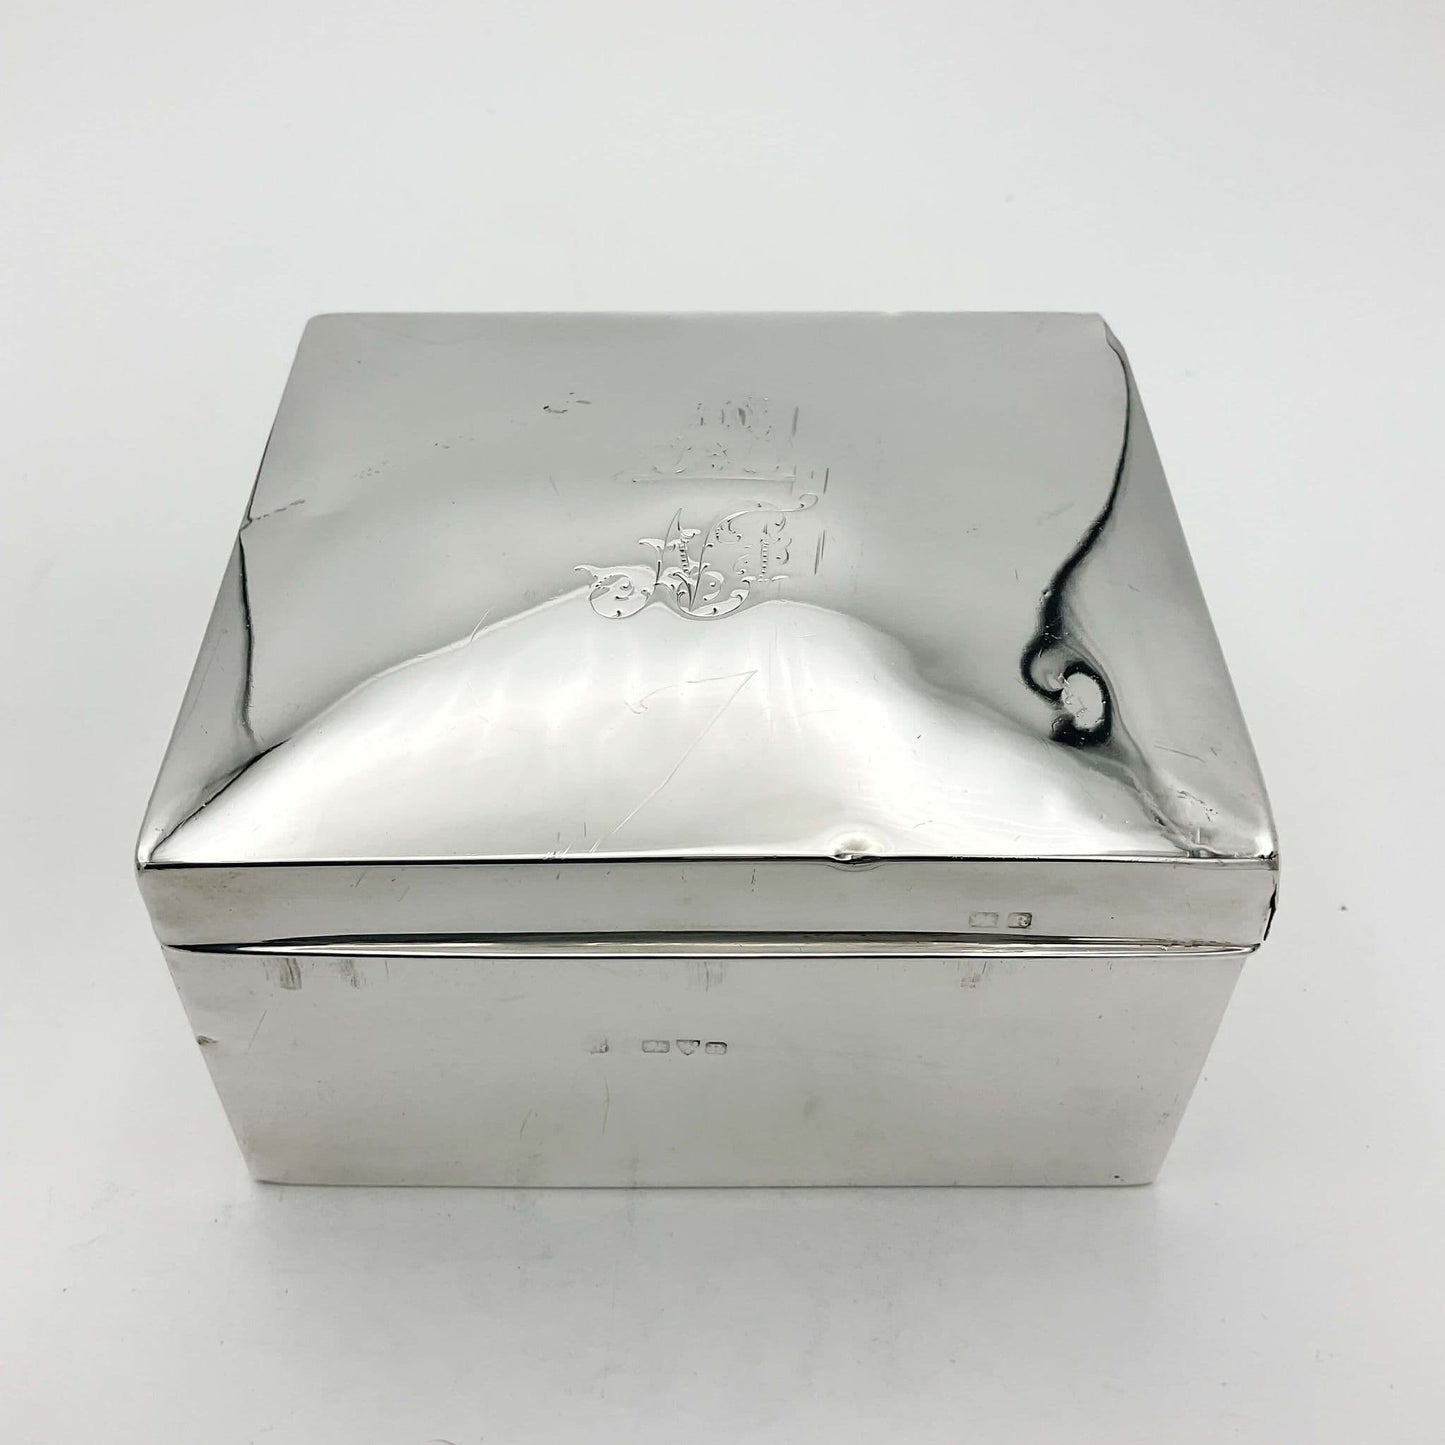 Square silver cigarette box with a engraved lid on a white background